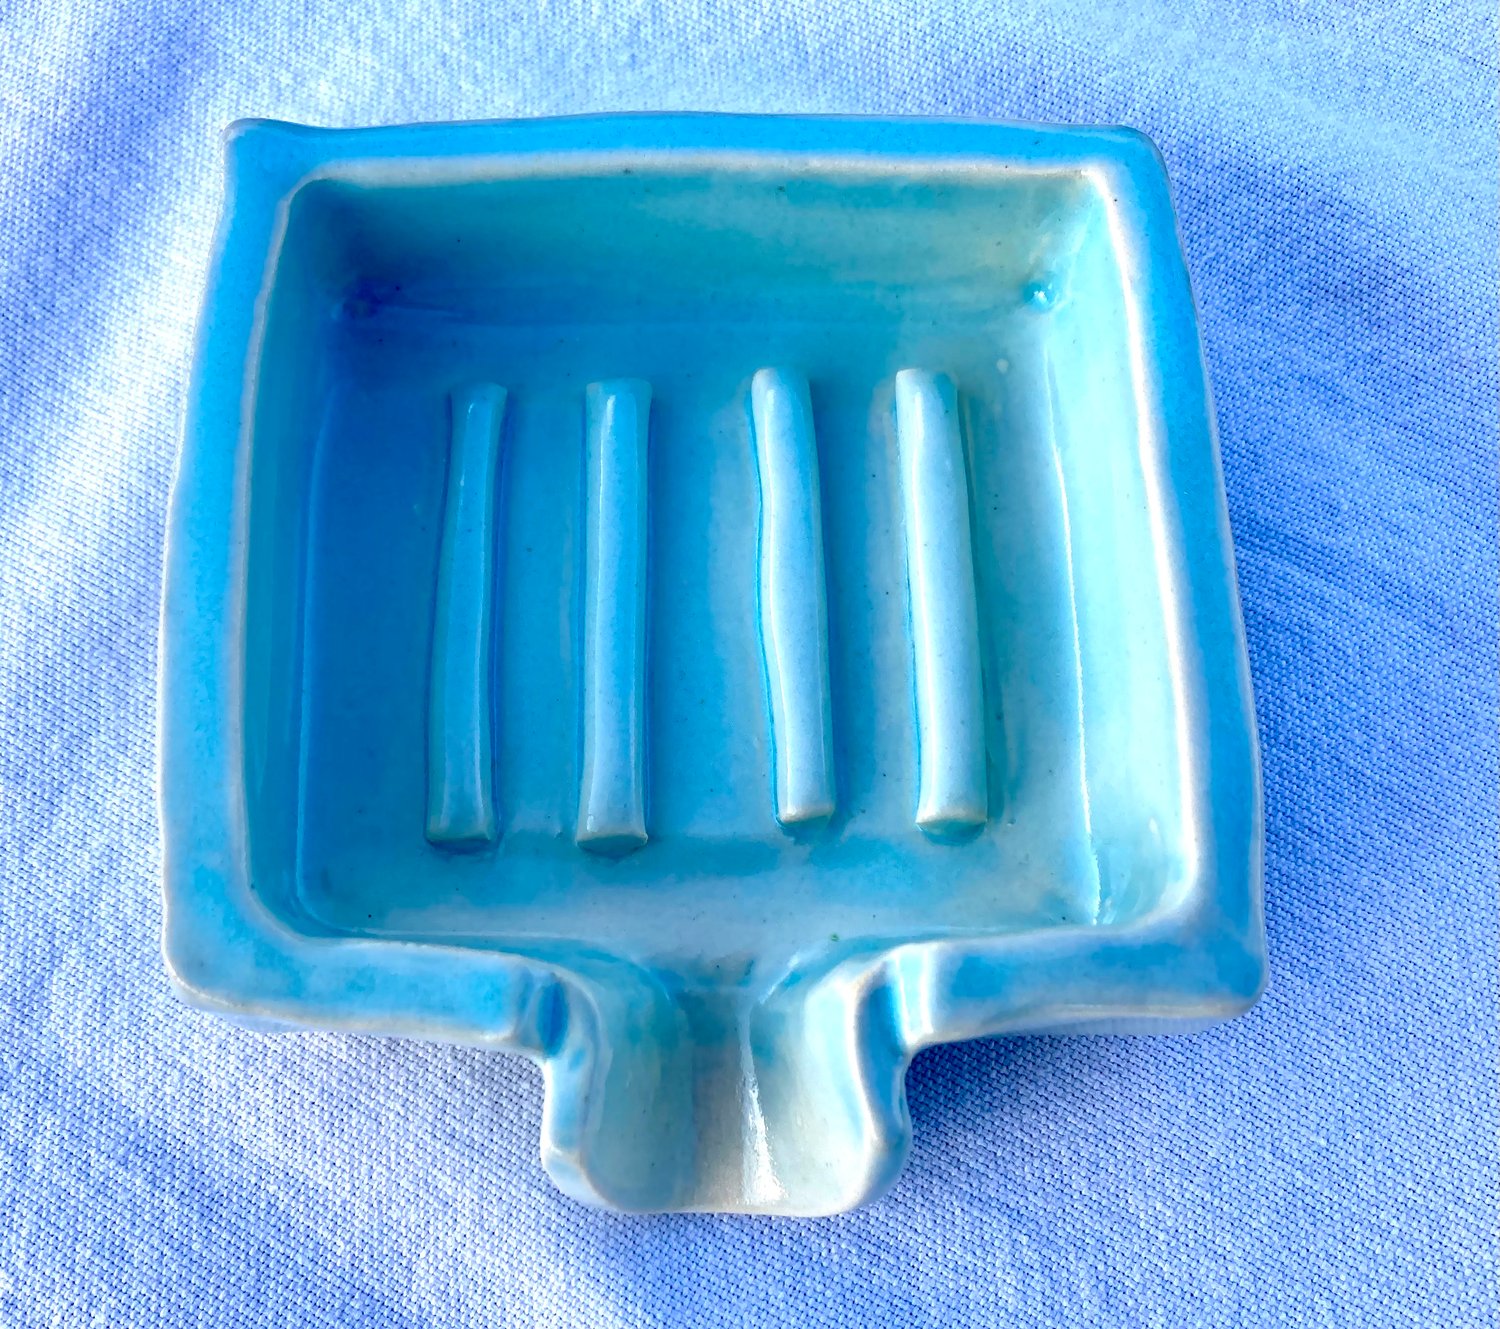 https://assets.bigcartel.com/product_images/00c930e6-a32e-4654-8ab2-60a5c73dcbab/draining-soap-dish-turquoise.jpg?auto=format&fit=max&w=1500